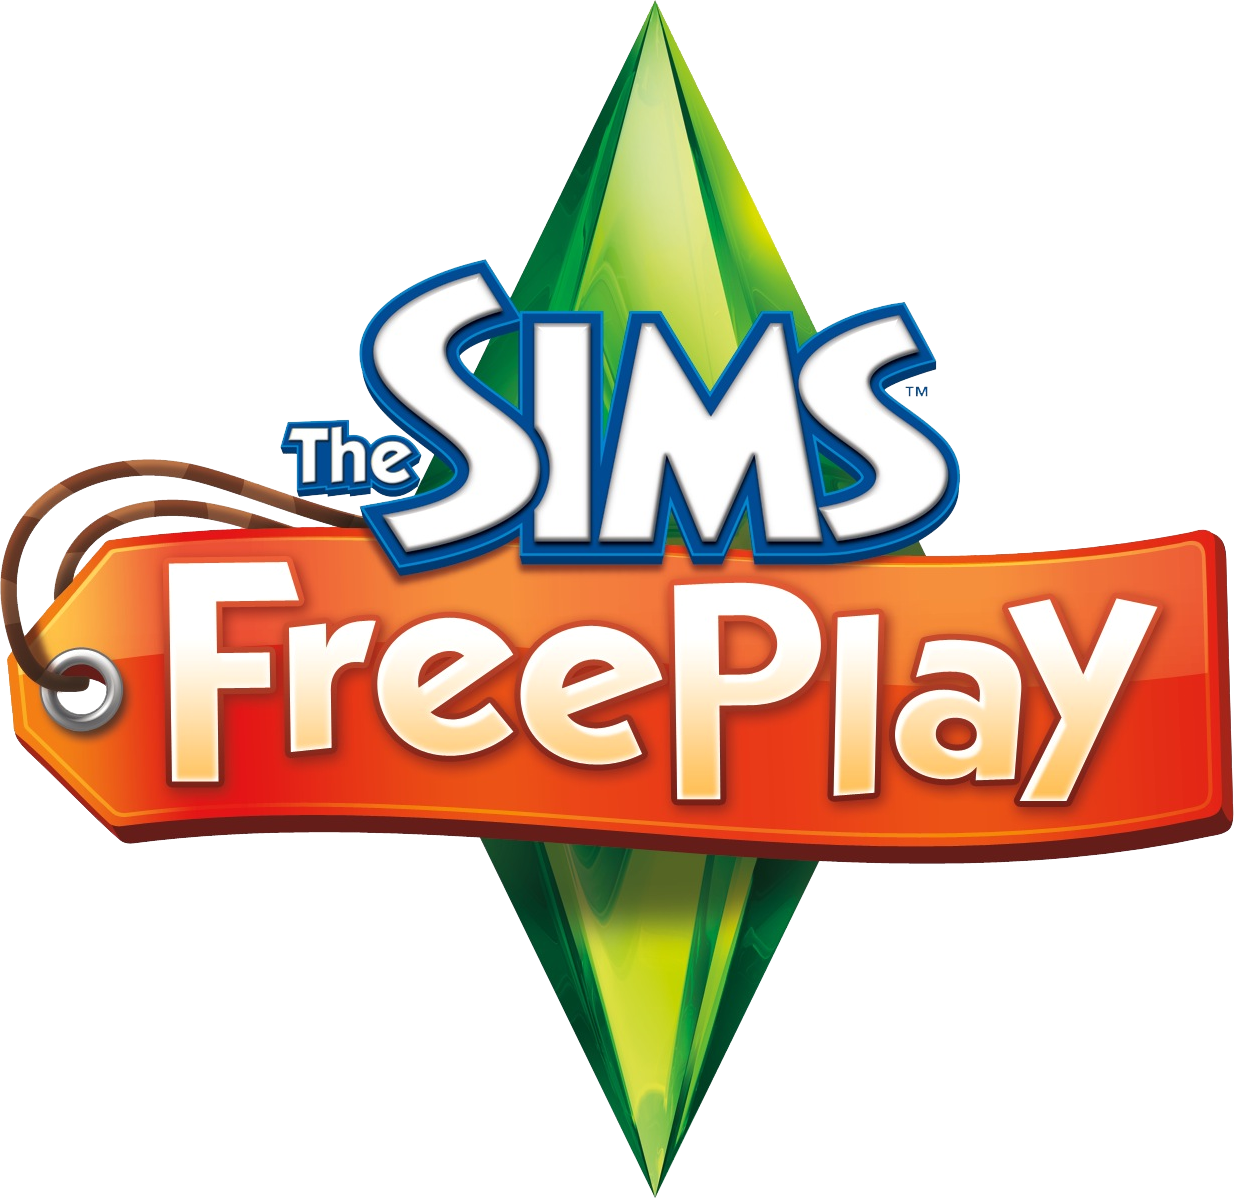 Download PNG image - The Sims Logo Transparent PNG 